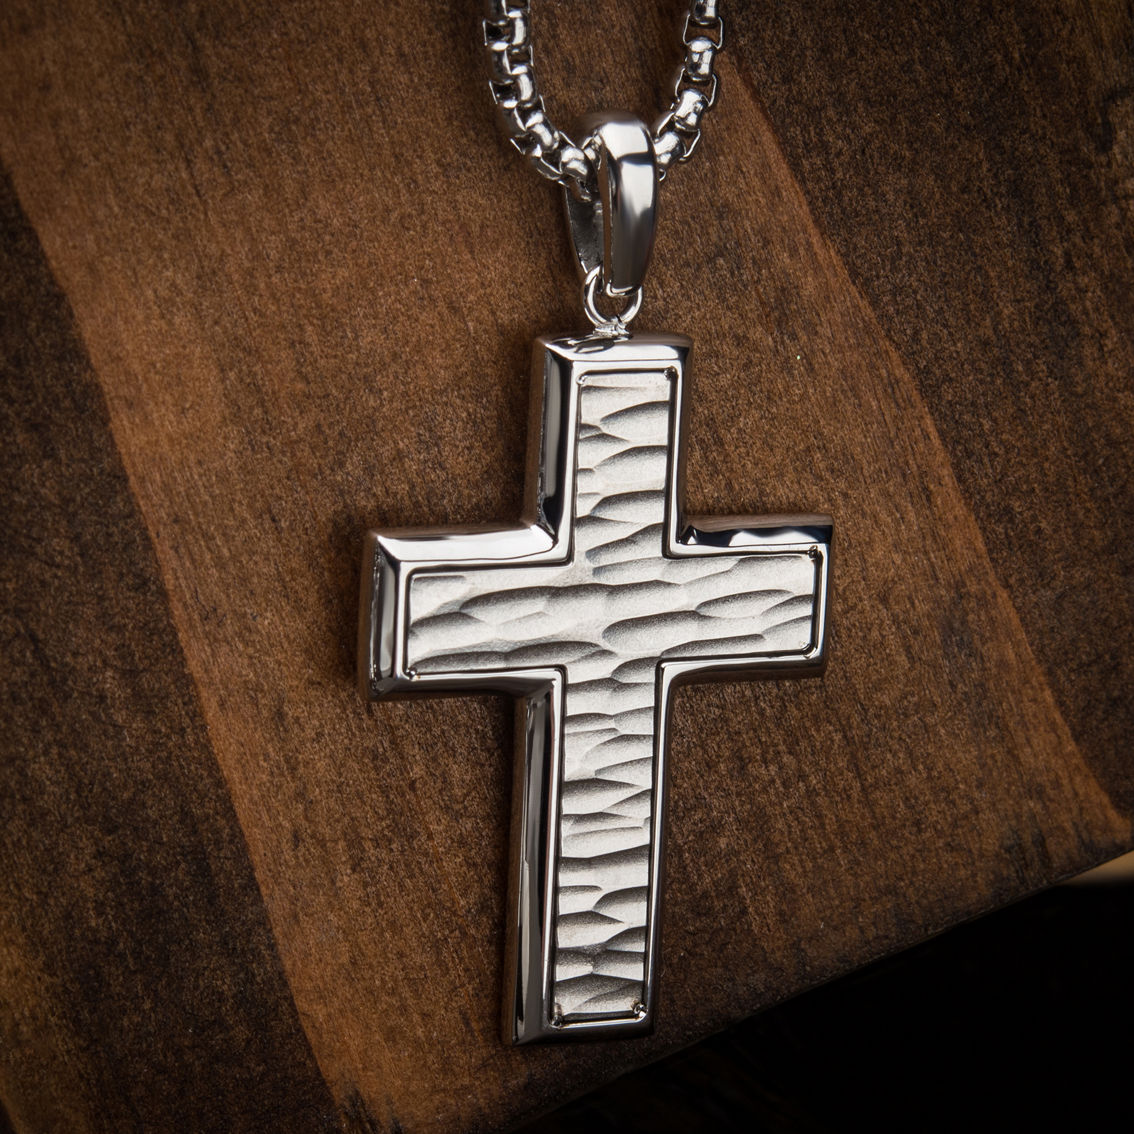 Inox Matte Stainless Steel Short Cross Pendant with Steel Box Chain - Image 4 of 4